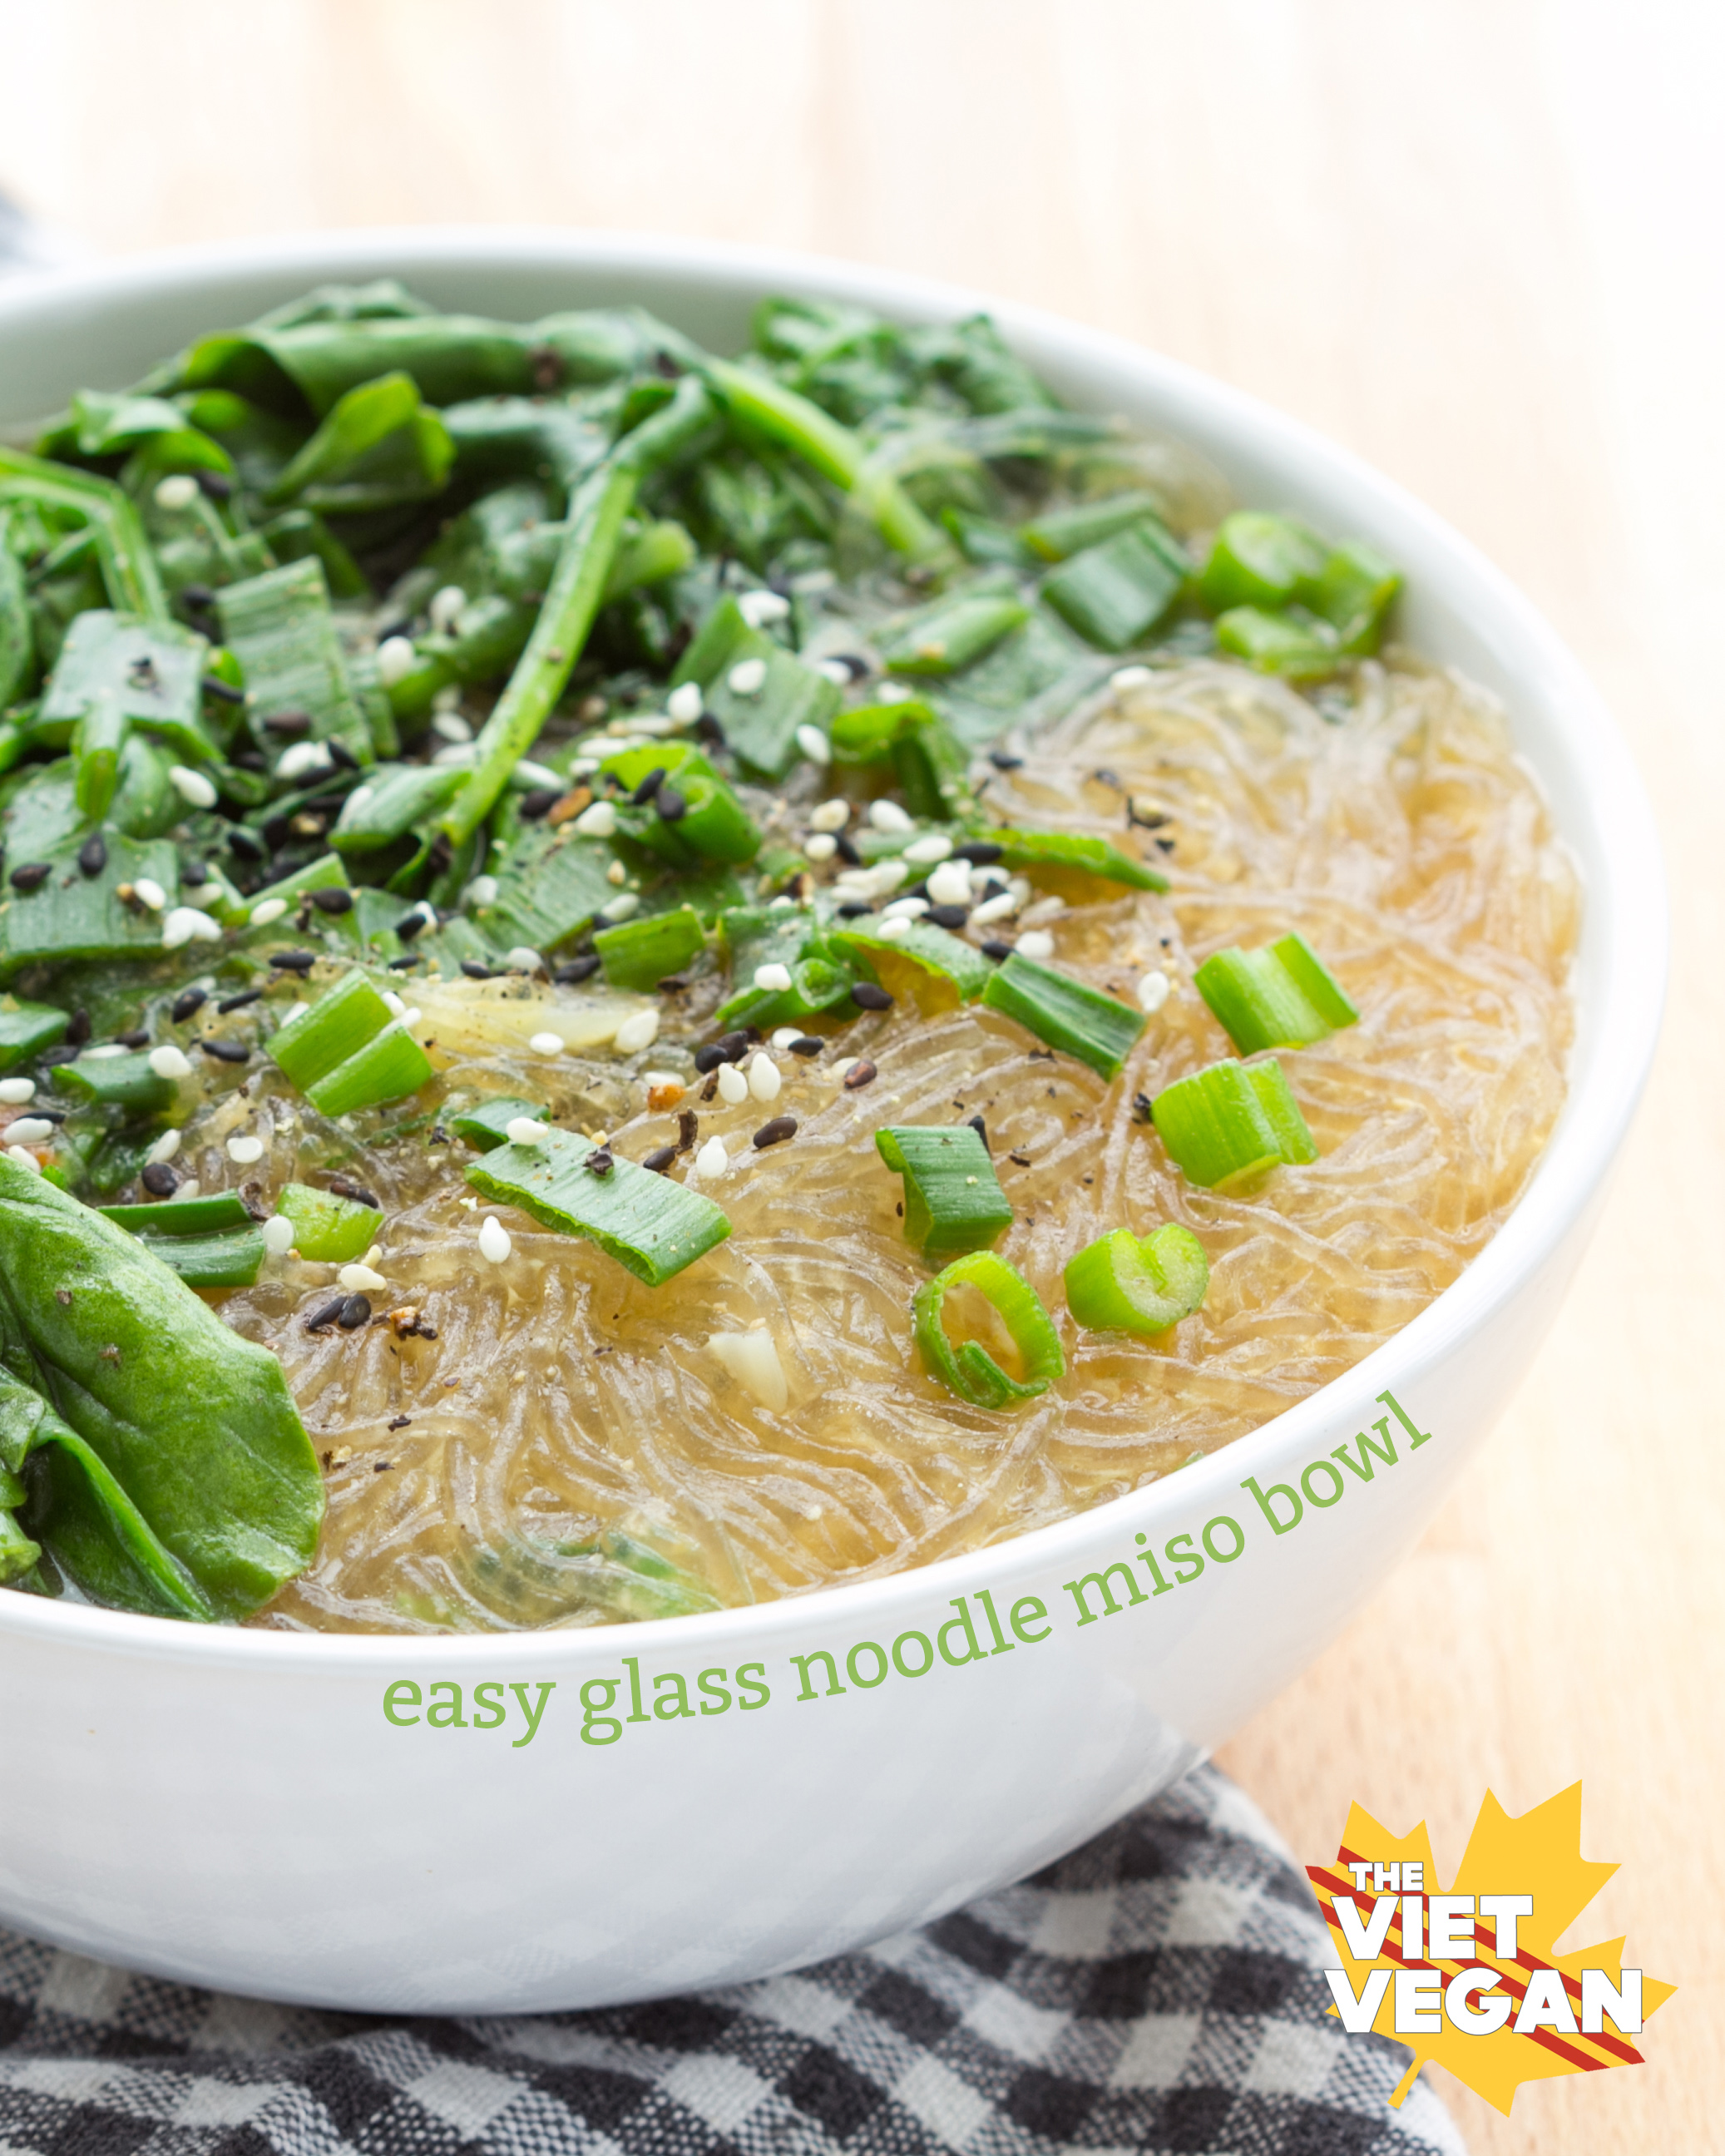 Easy Glass Noodle Miso Bowl The Viet Vegan,How To Make A Strawberry Mojito